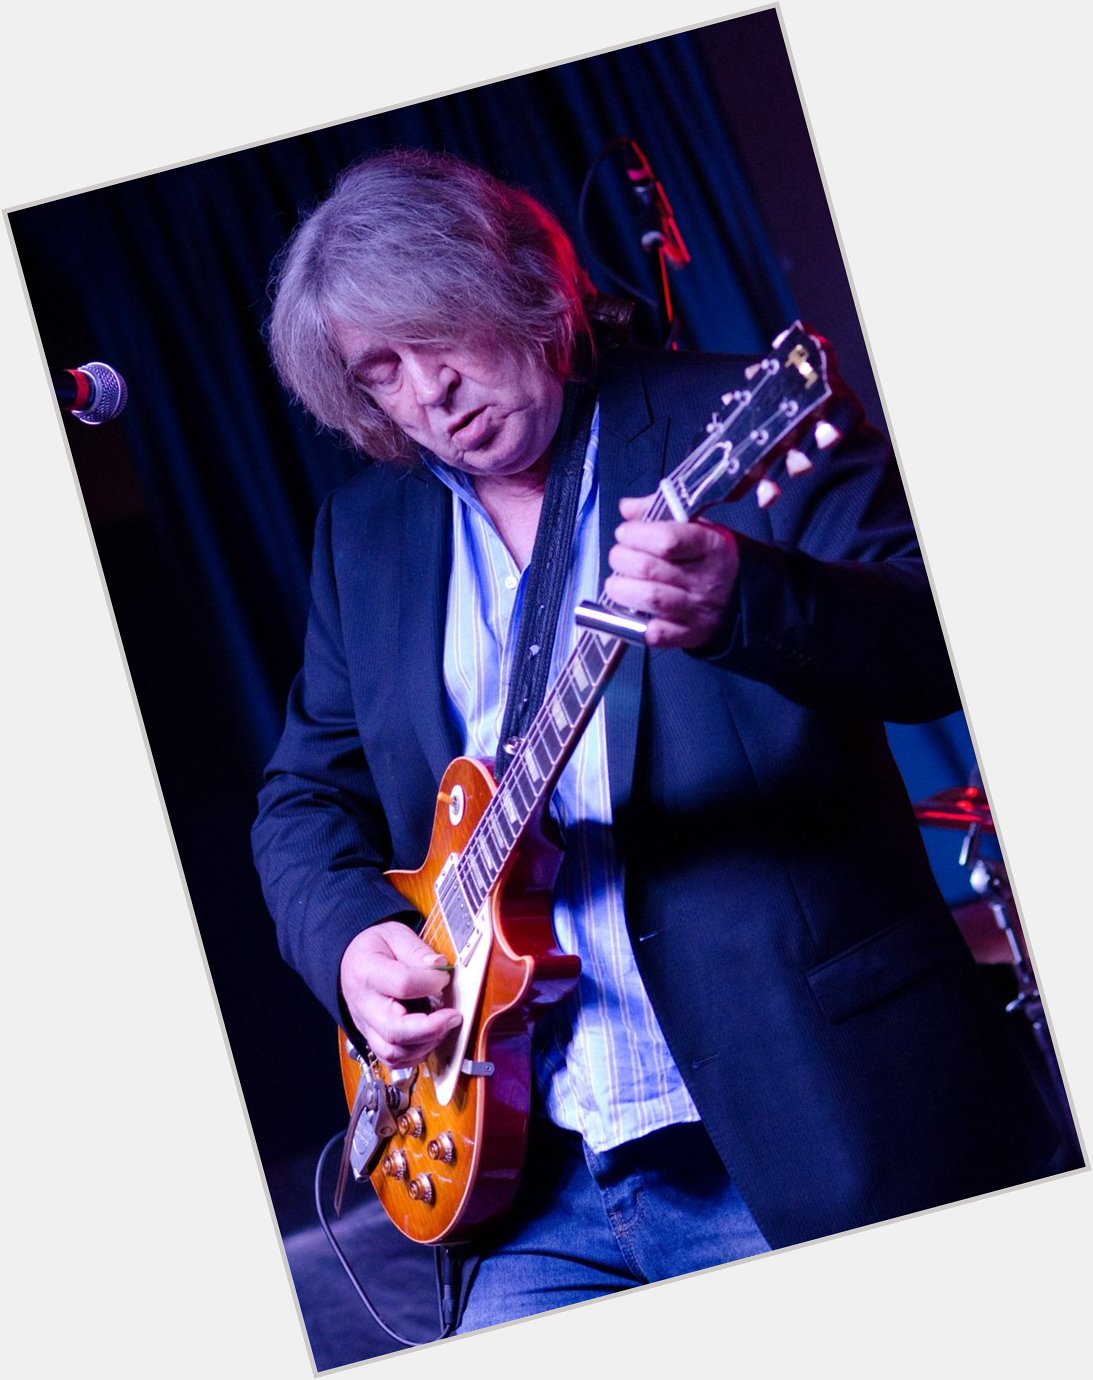 Happy 73 birthday to the amazing guitarist Mick Taylor (The Rolling Stones, John Mayall)! 